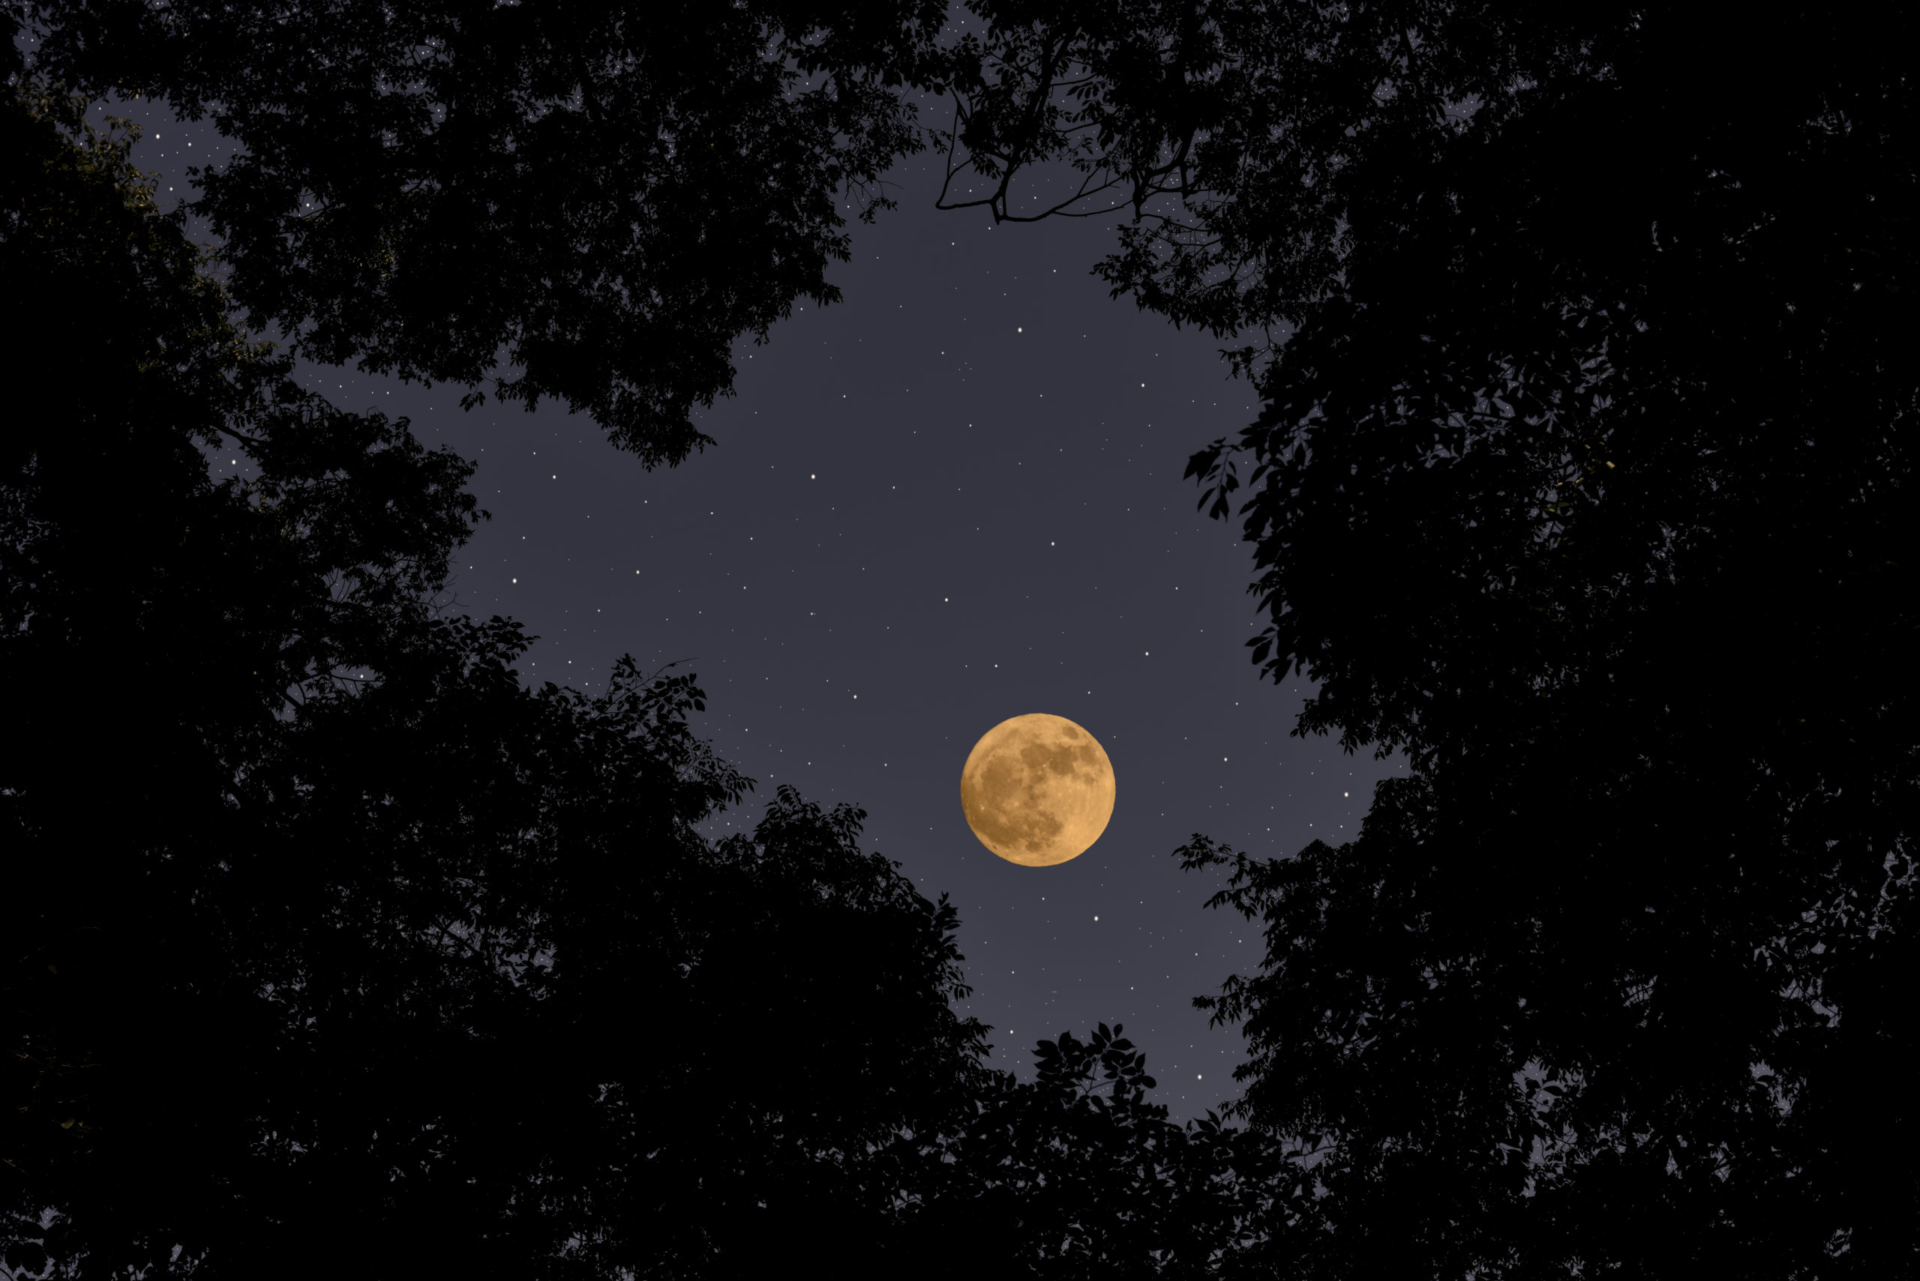 A full moon visible through the tree canopy